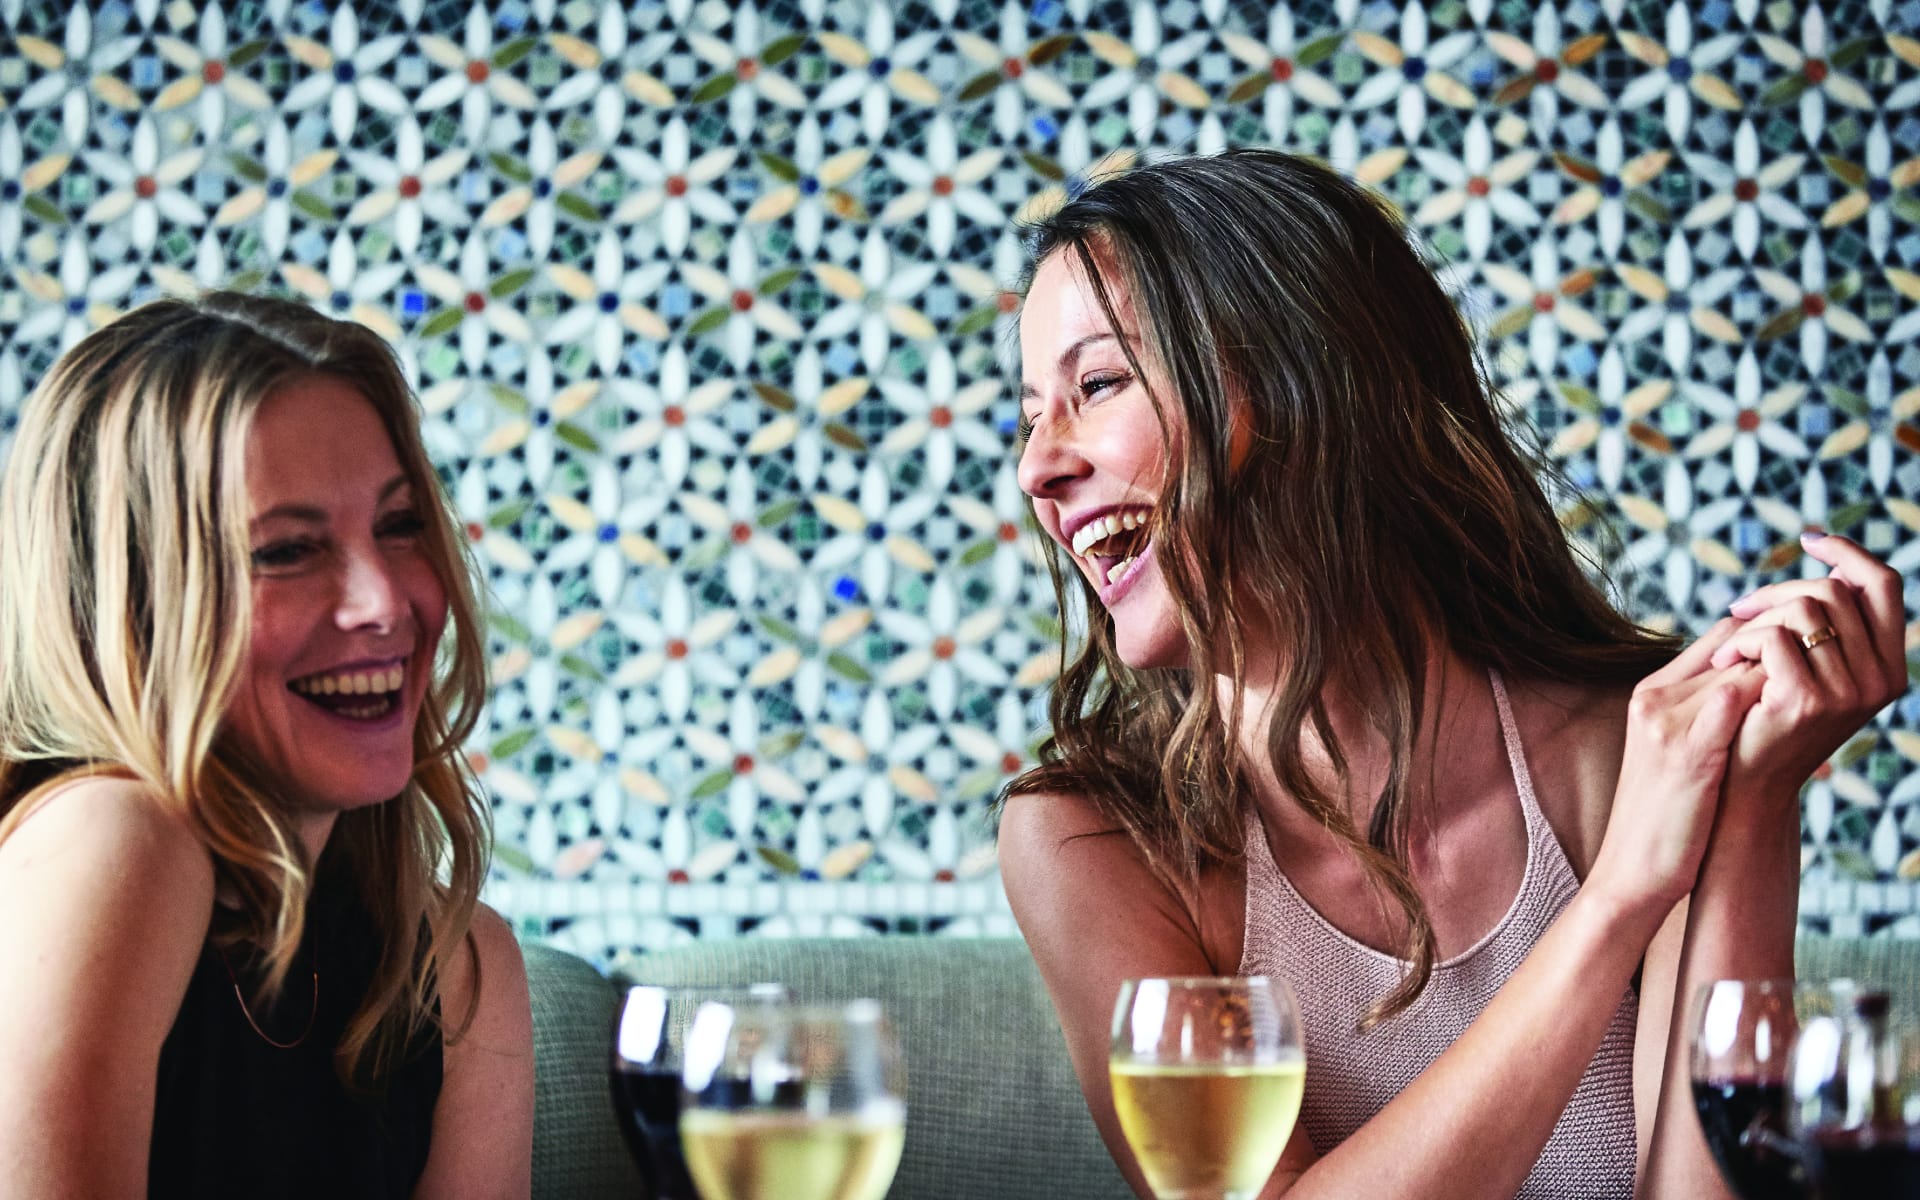 An image of two women laughing in a restaurant